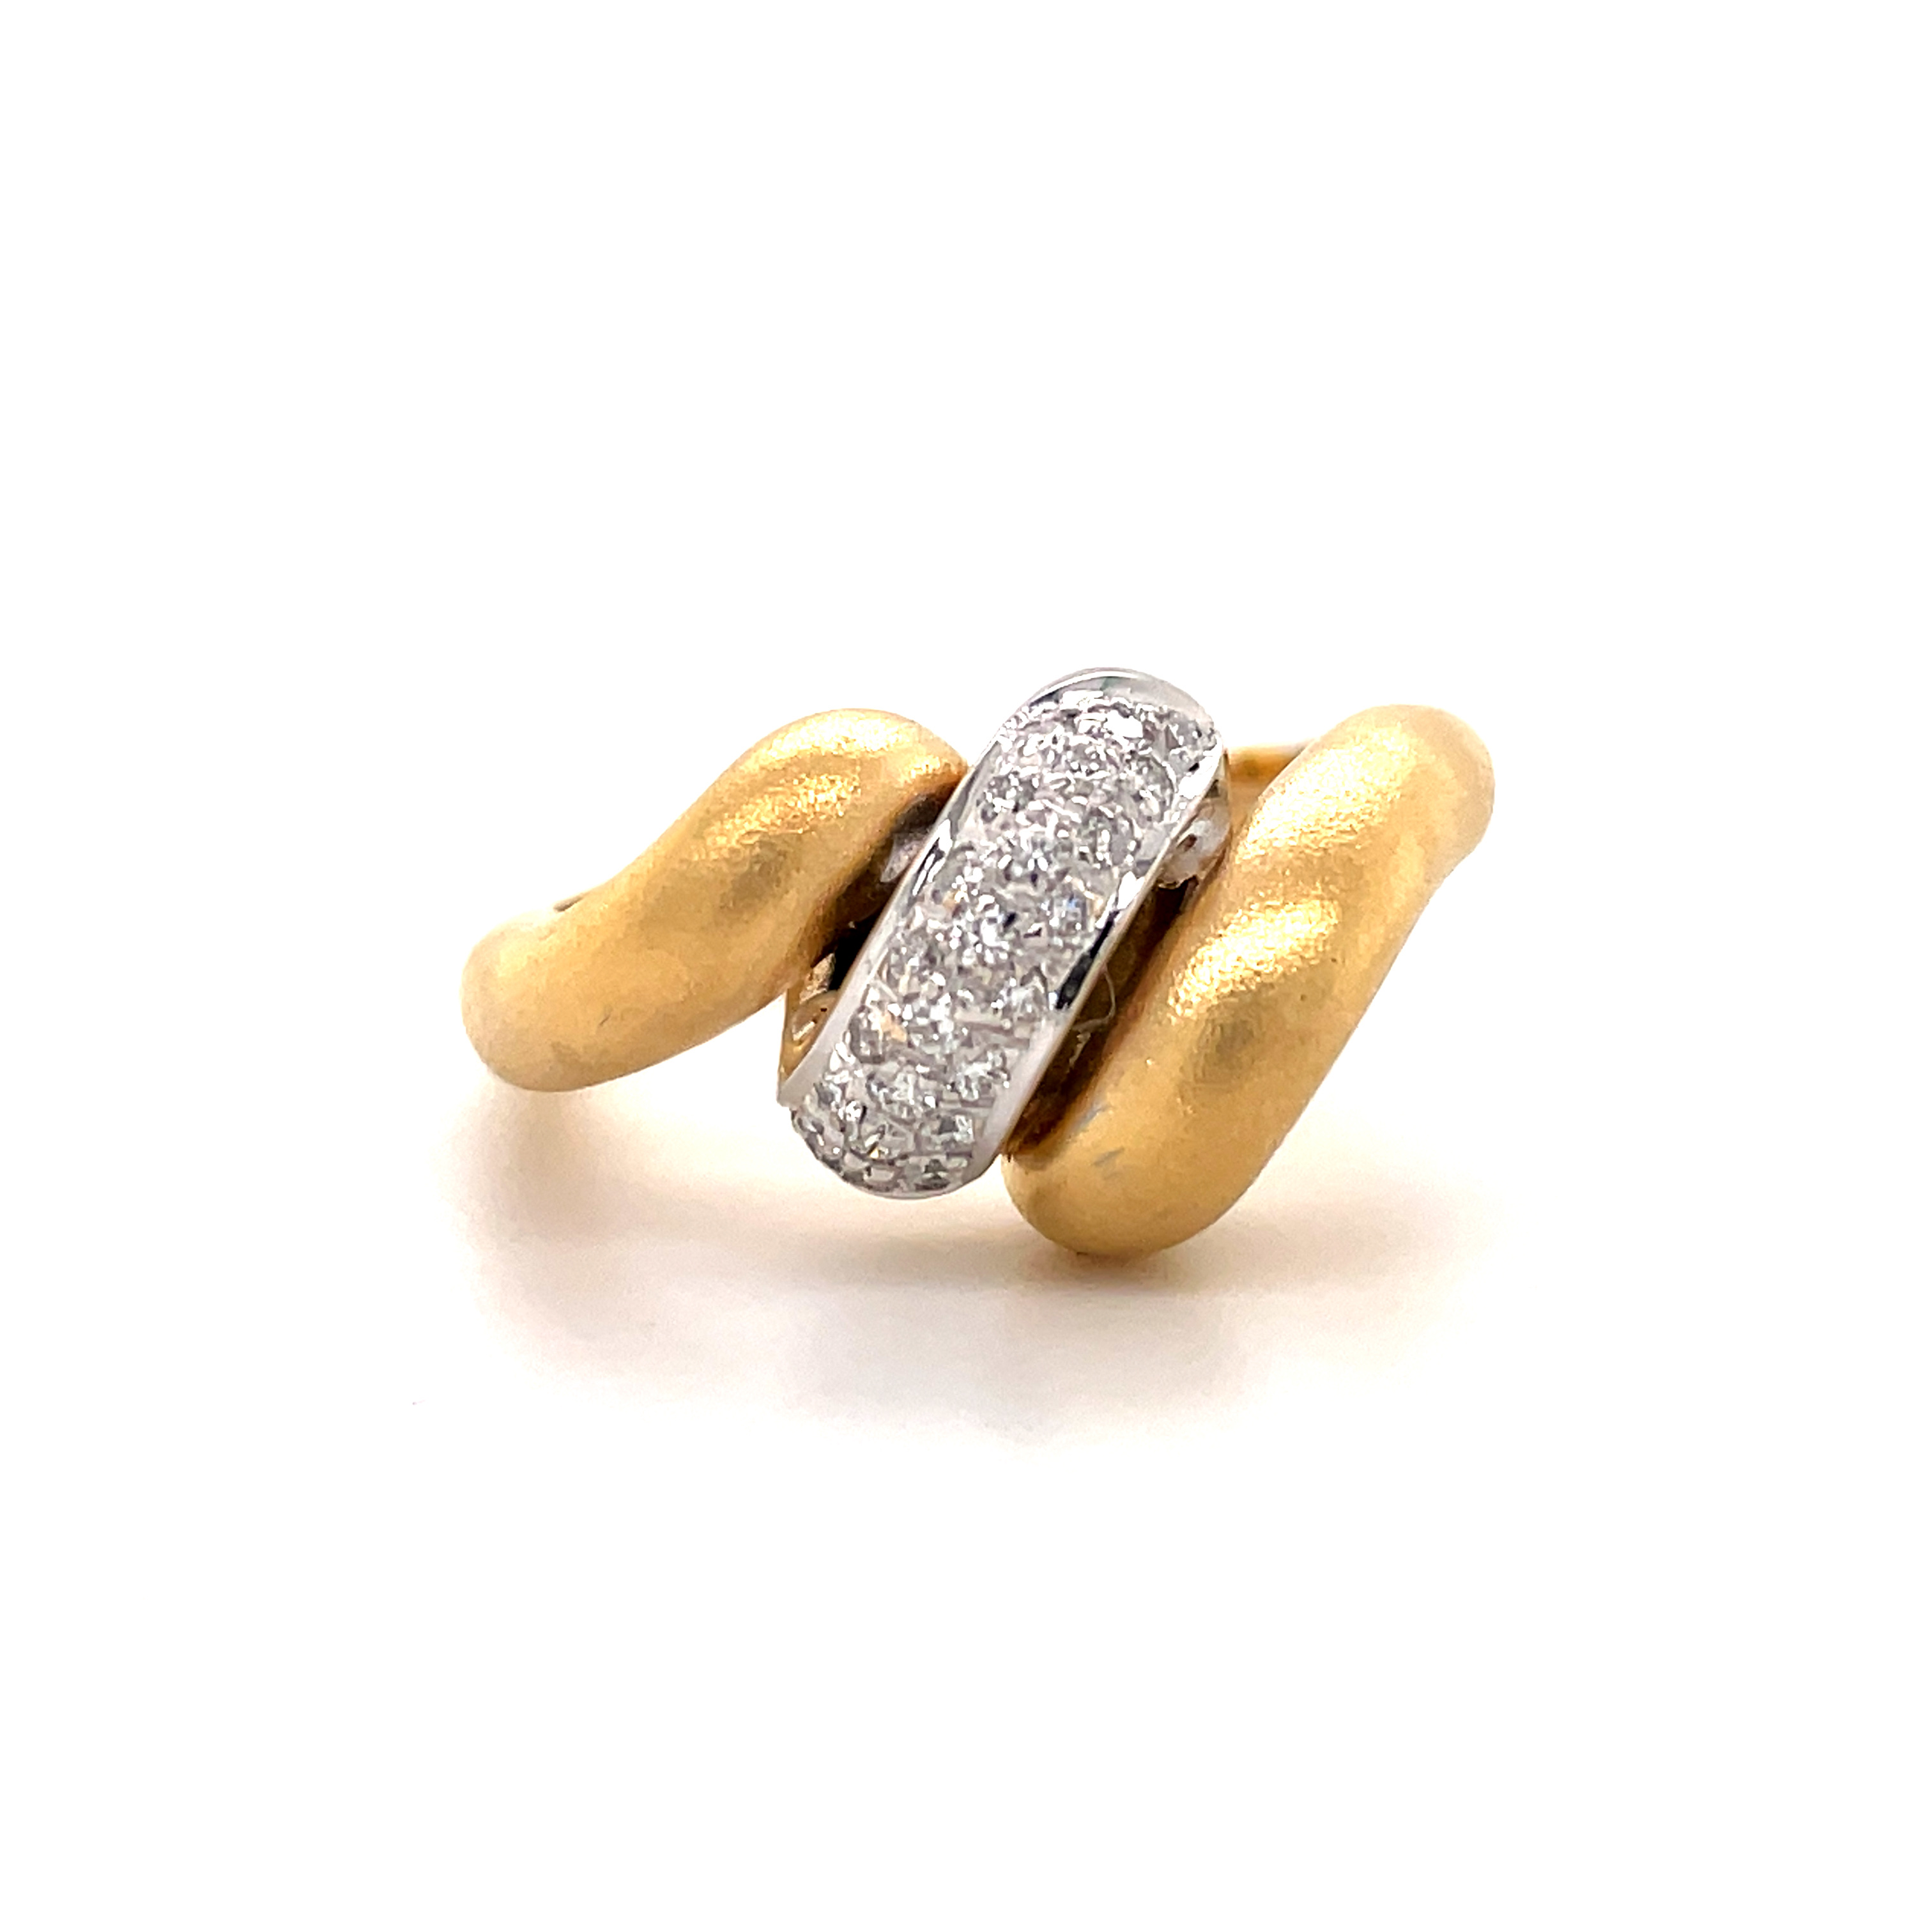 A unique combination of timeless beauty and modern style, this Italian 18k gold Triple Coil Diamond Ring is sure to stand out. Crafted with 4.15 mm width and 0.20 cts of round diamonds, this piece is sure to dazzle. With a matte finish and 11.50 mm width, it's an eye-catching accessory perfect for any occasion. Size 7.5 (can be resized).